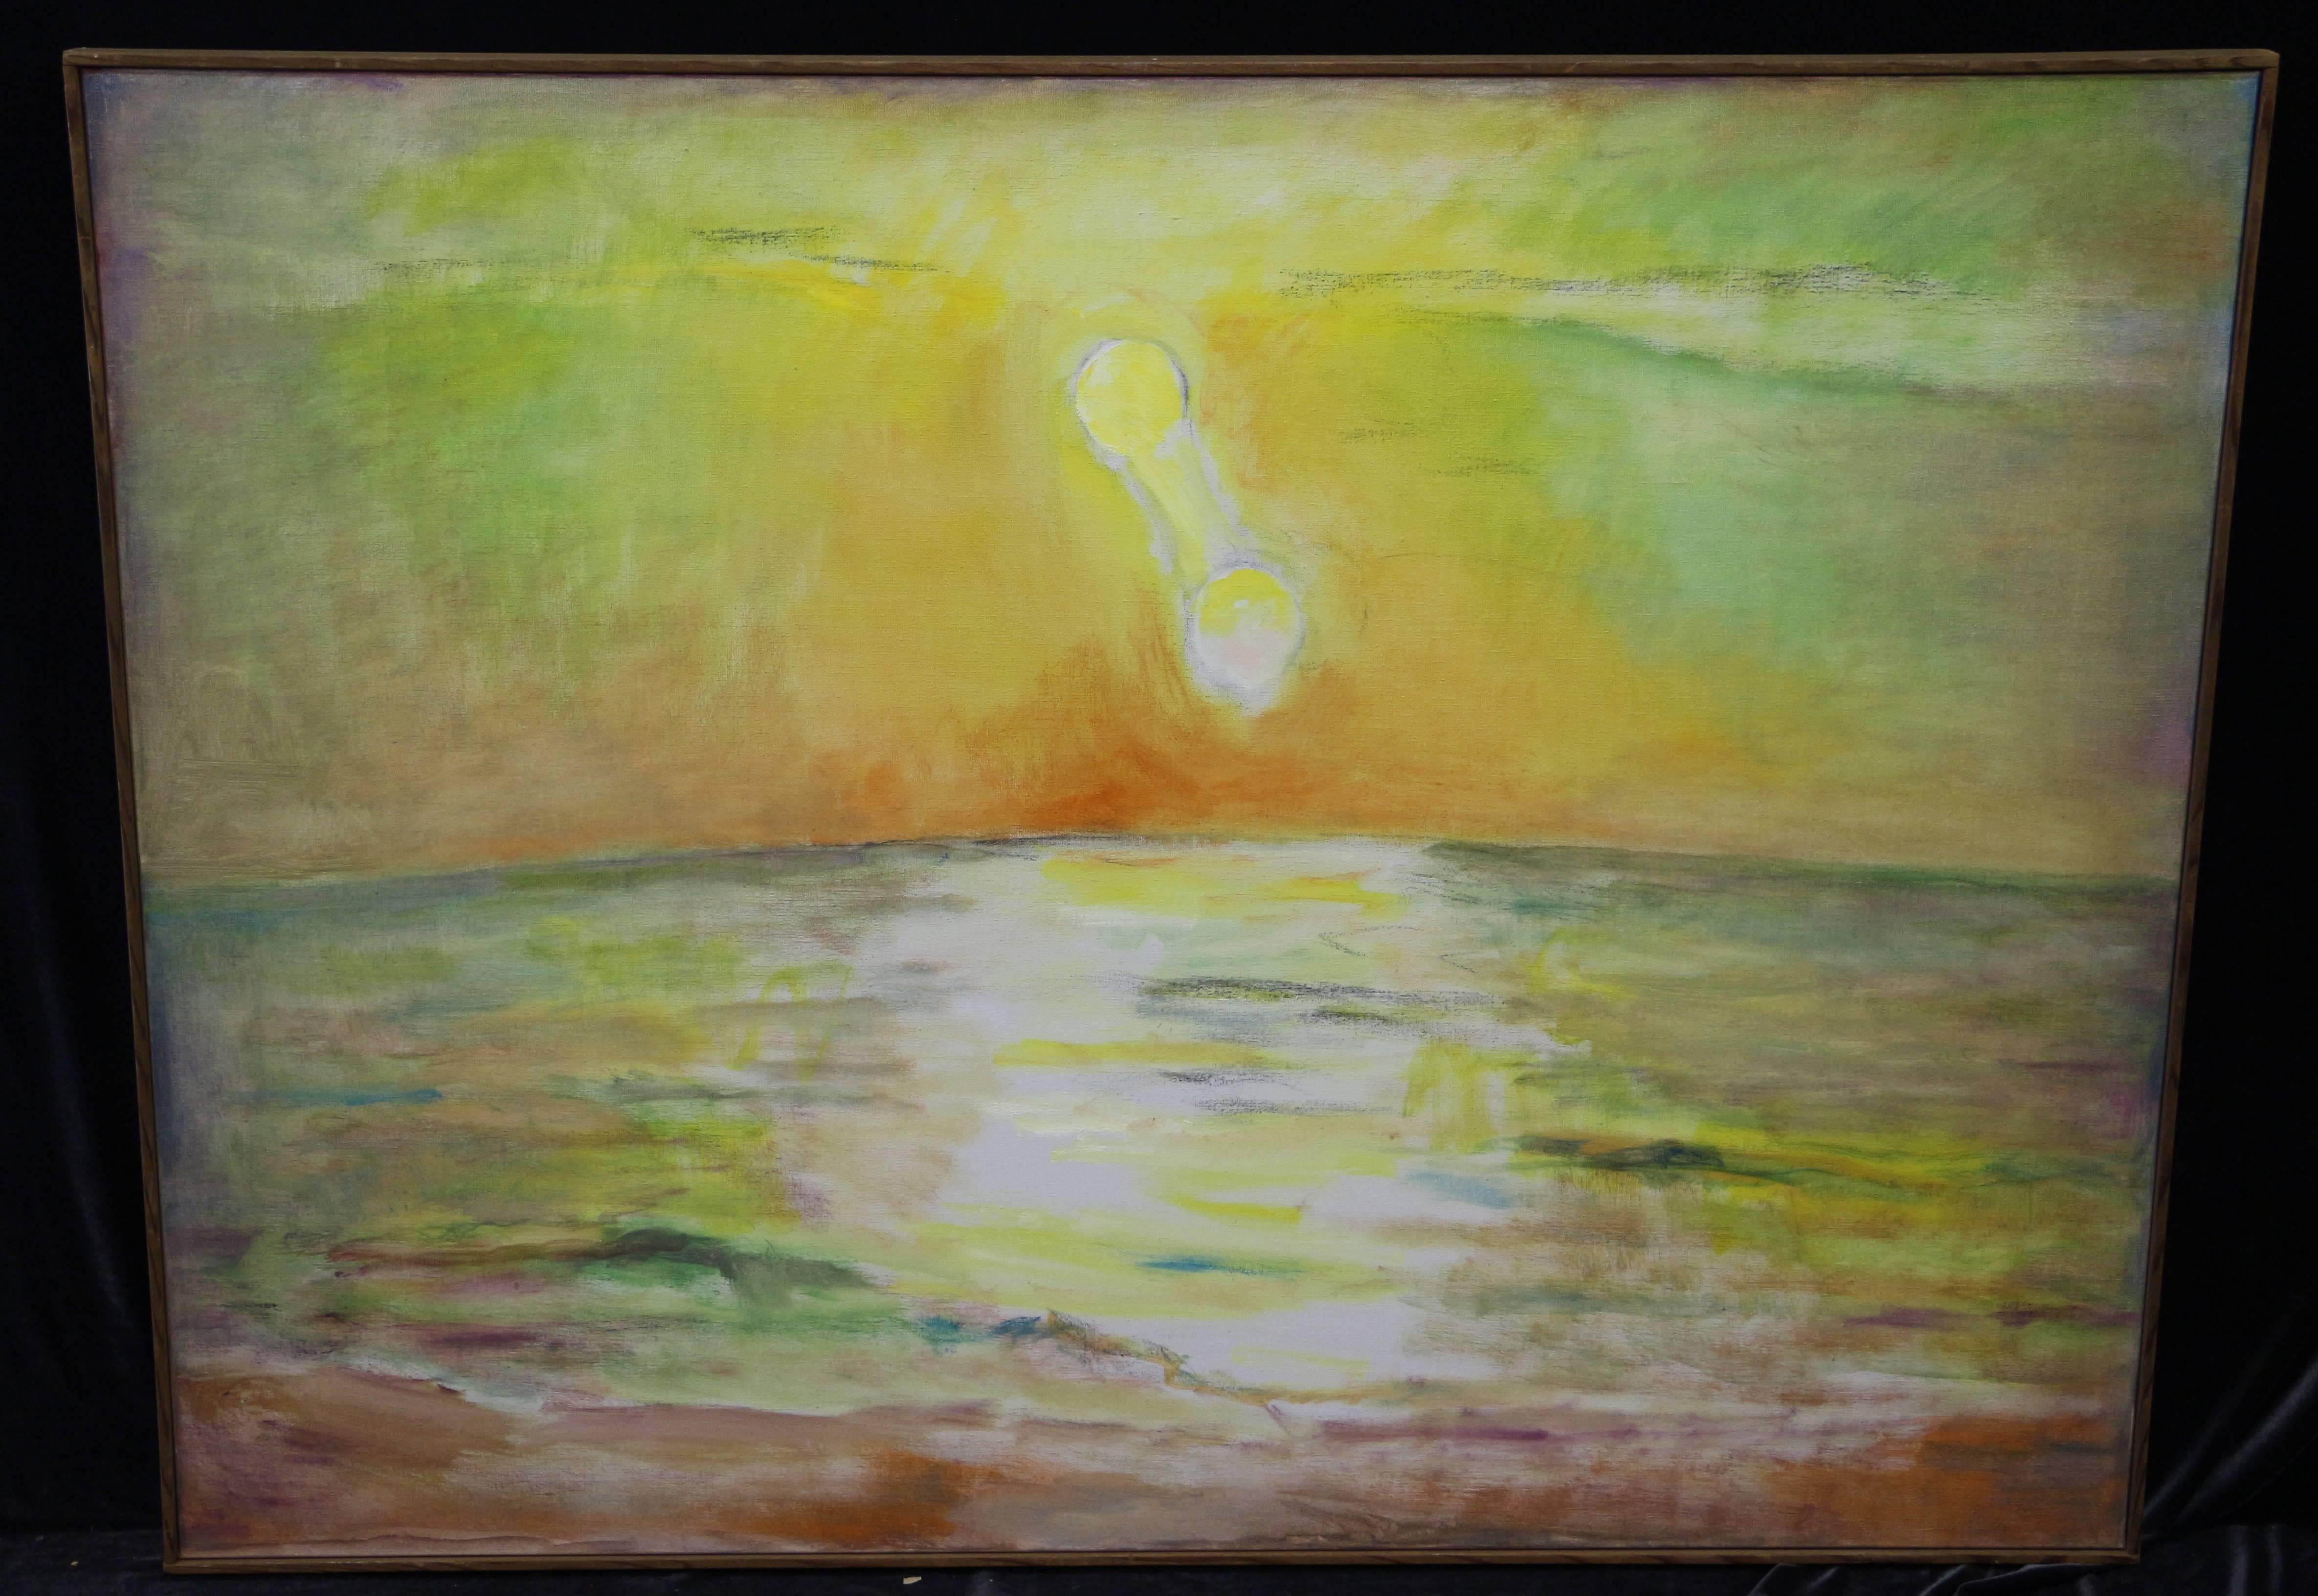 Western Sea, bright and colorful abstract landscape of sun over the sea  - Painting by Frederick S. Wight